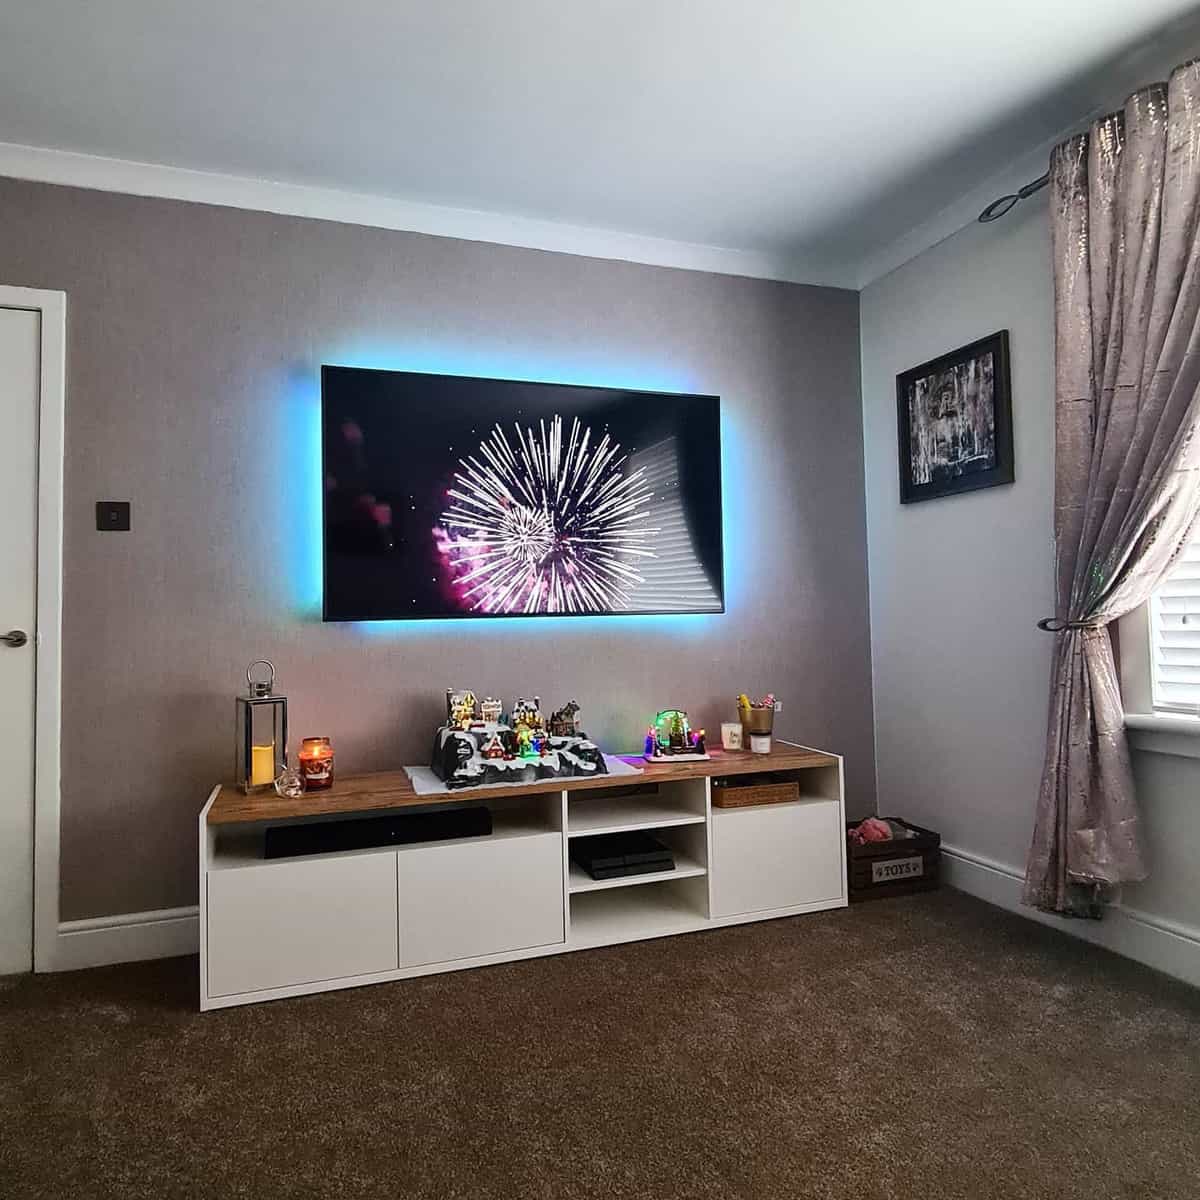 Small living room with brown carpet and wall-mounted television